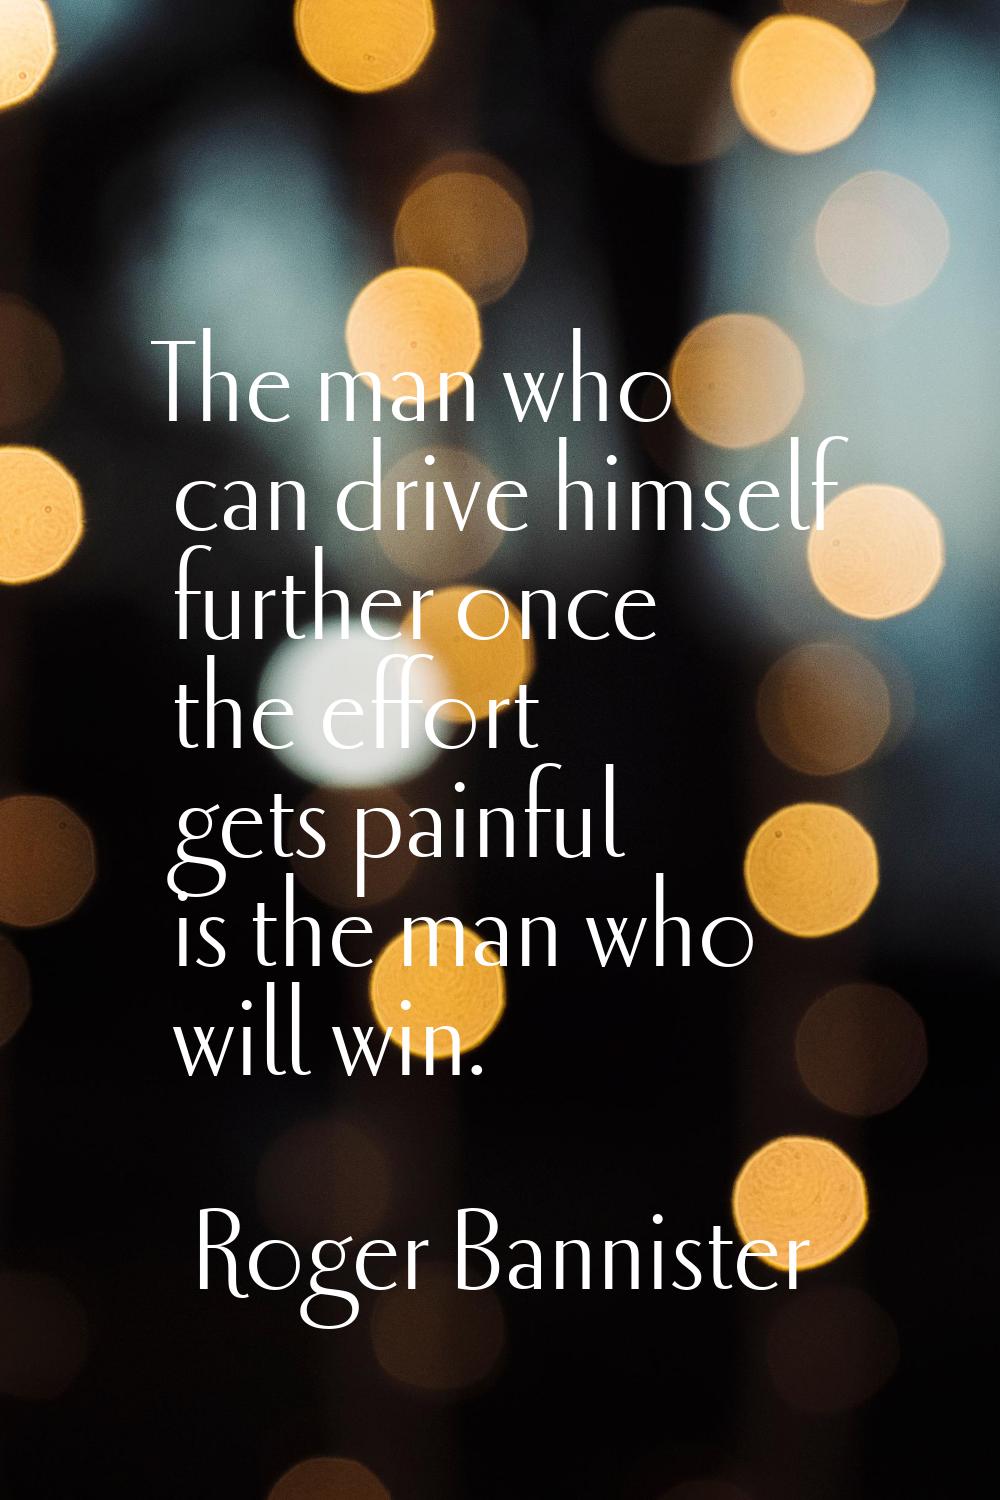 The man who can drive himself further once the effort gets painful is the man who will win.